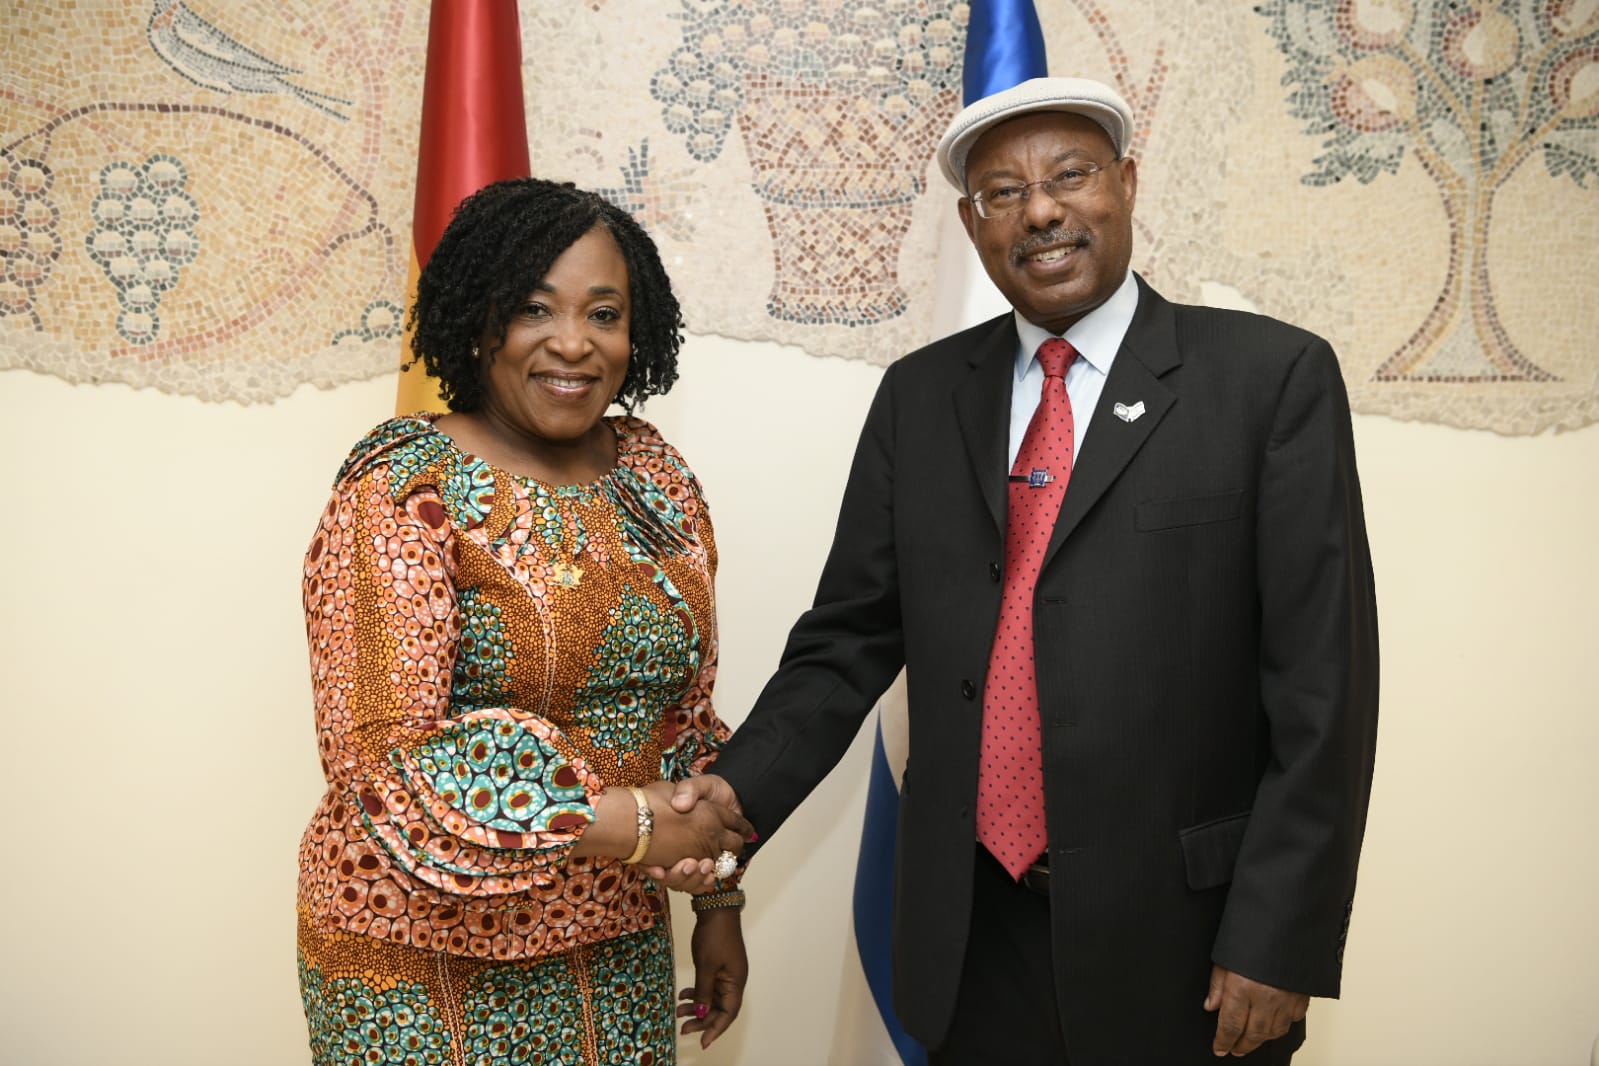 Hon. Minister for Foreign Affairs, Shirley Ayorkor Botchwey in a pose with Chairman of the Coalition Party, the Likud, in the Israeli Knesset, Mr. Avraham Neguise